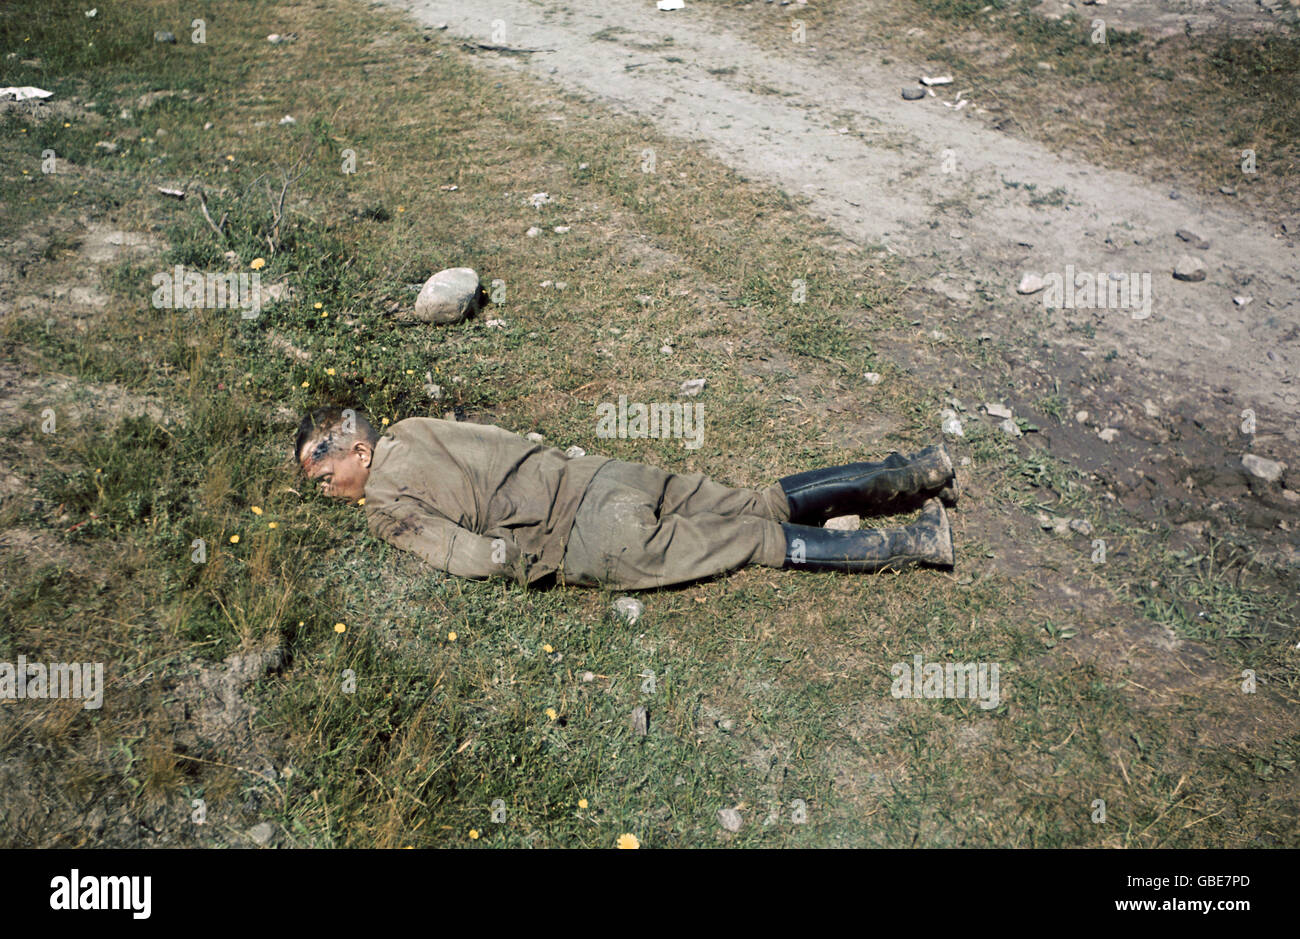 events, Second World War / WWII, Russia 1941, dead Soviet soldier at the roadside, Belarus, July 1941, Additional-Rights-Clearences-Not Available Stock Photo